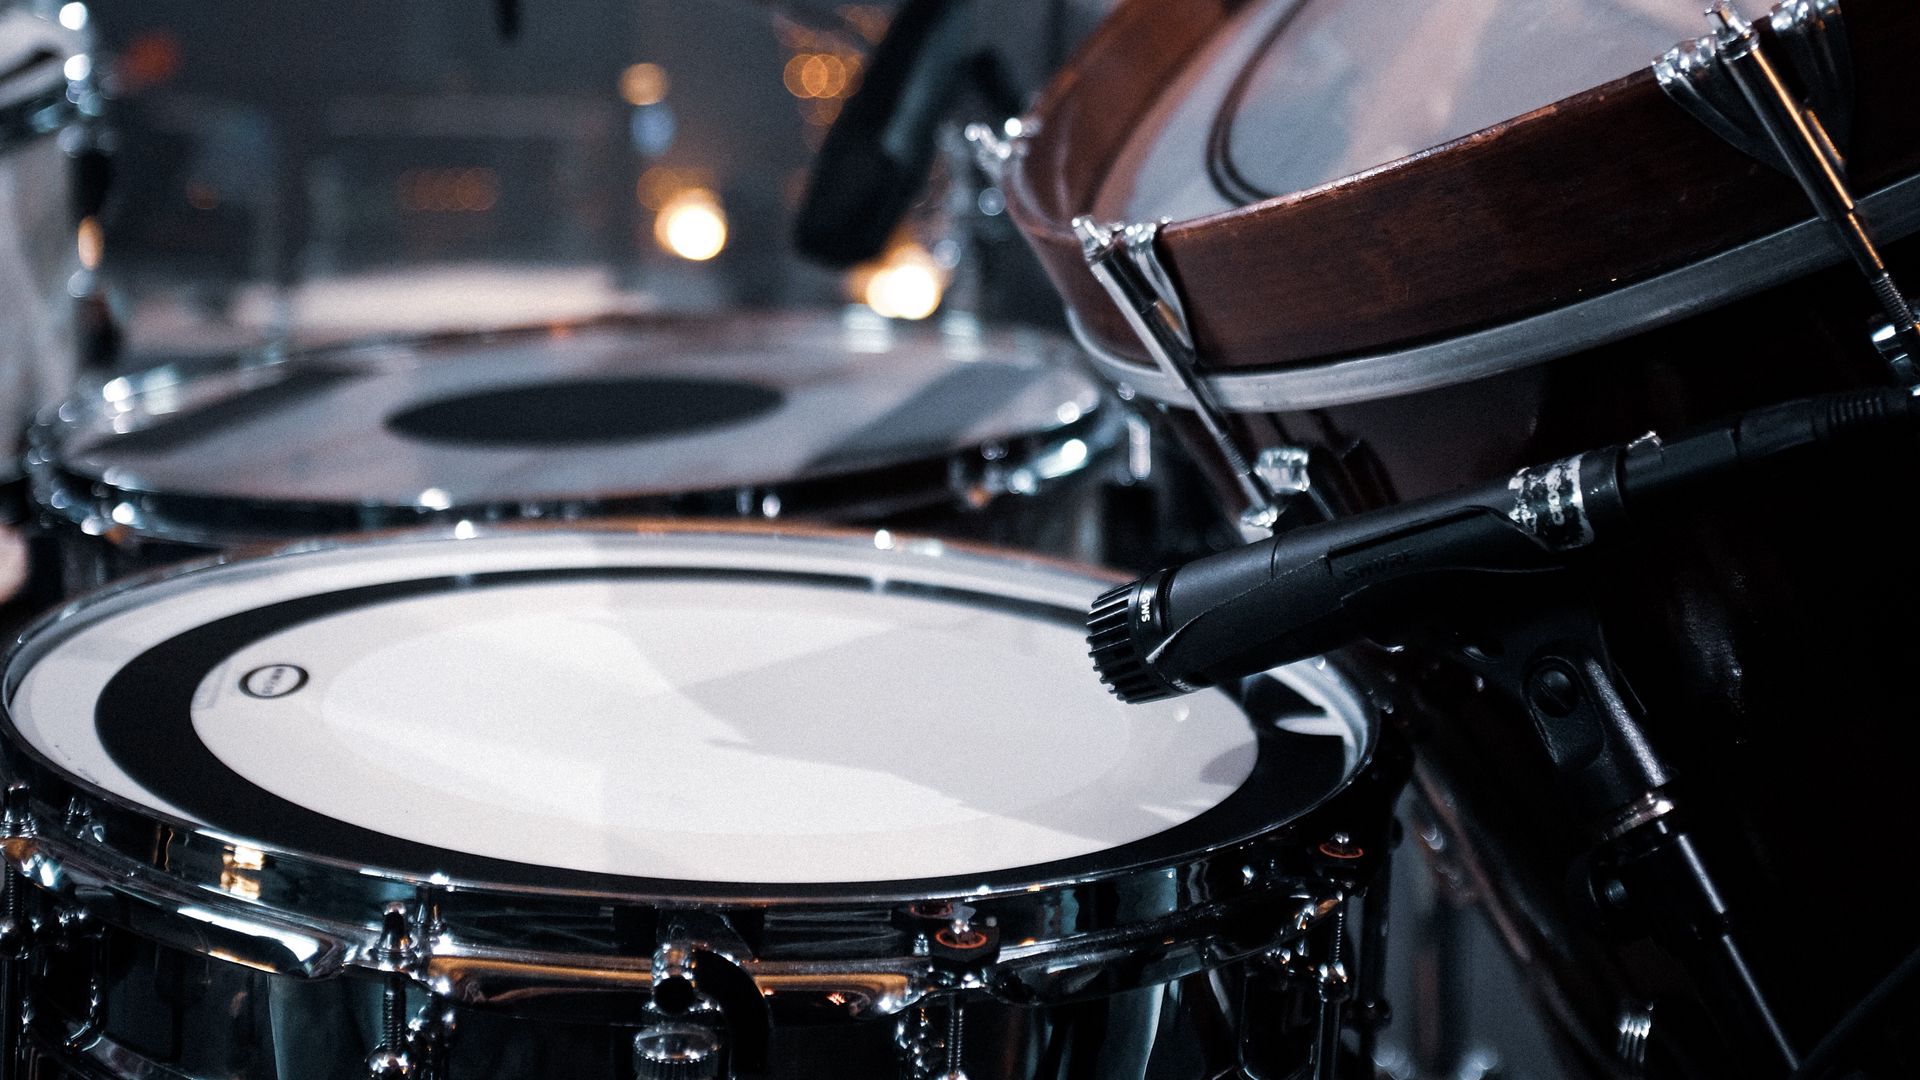 Download wallpaper 1920x1080 drums, drum kit, musical instrument,  microphones full hd, hdtv, fhd, 1080p hd background